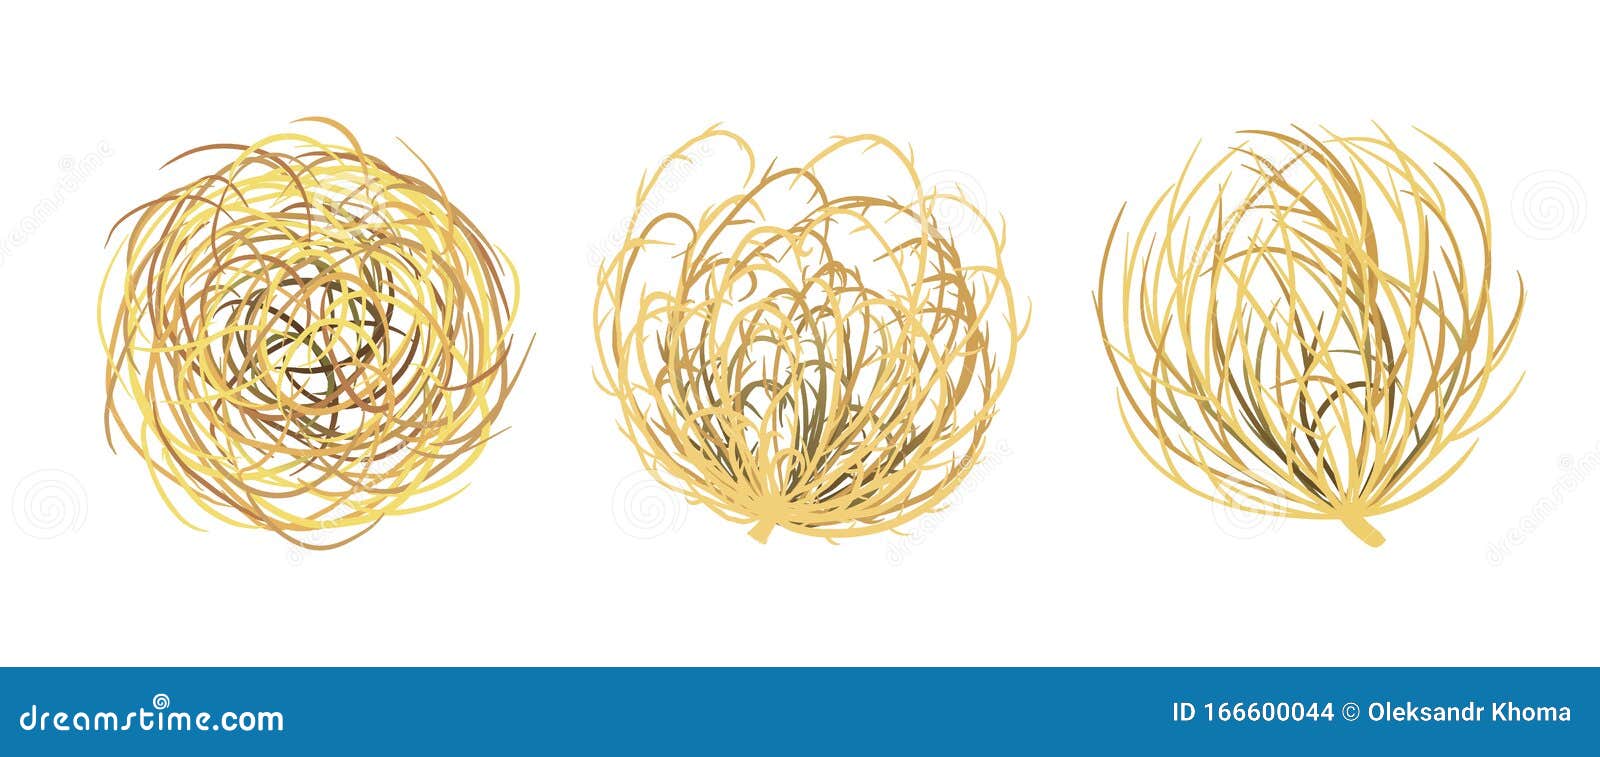 Tumbleweed Plant Vector Set Isolated on White Stock Vector